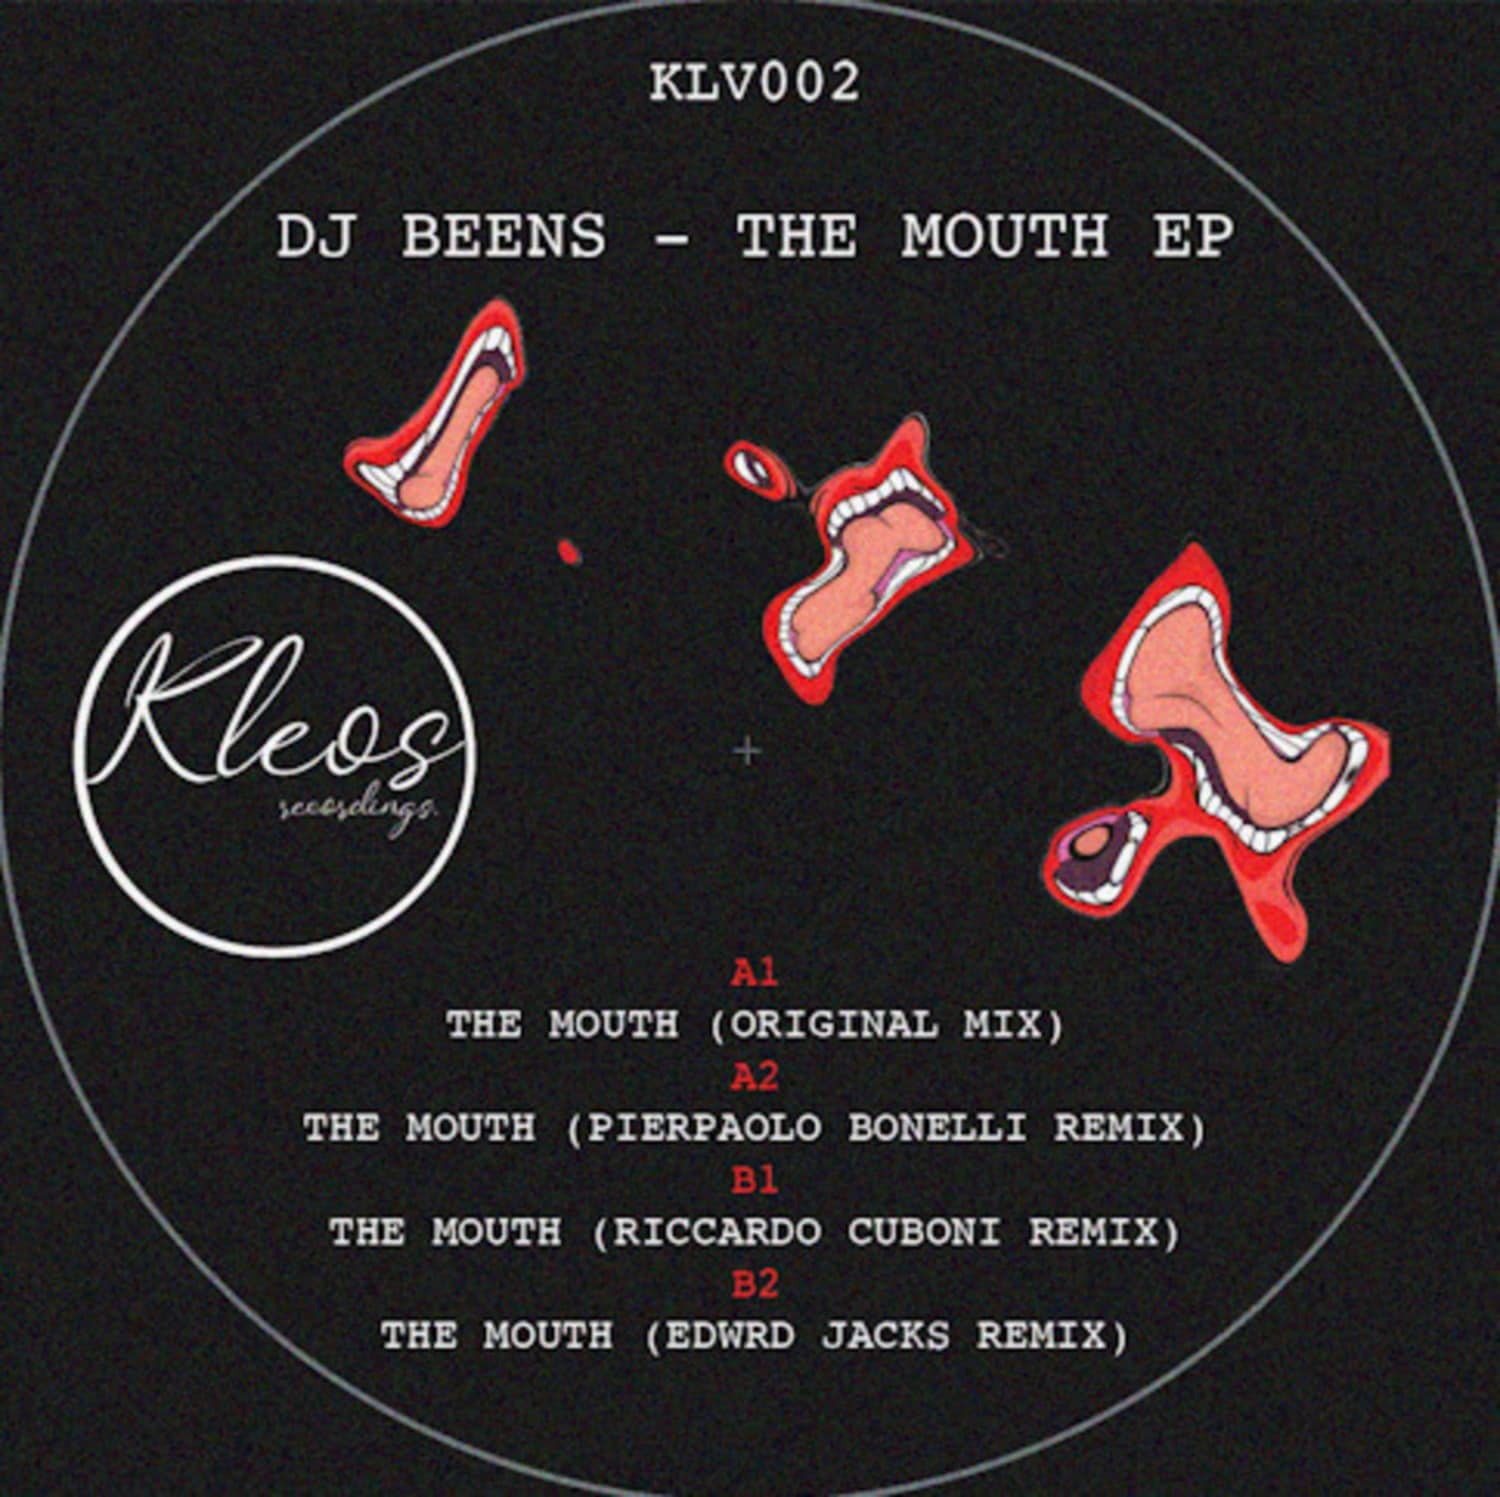 DJ Beens - THE MOUTH EP